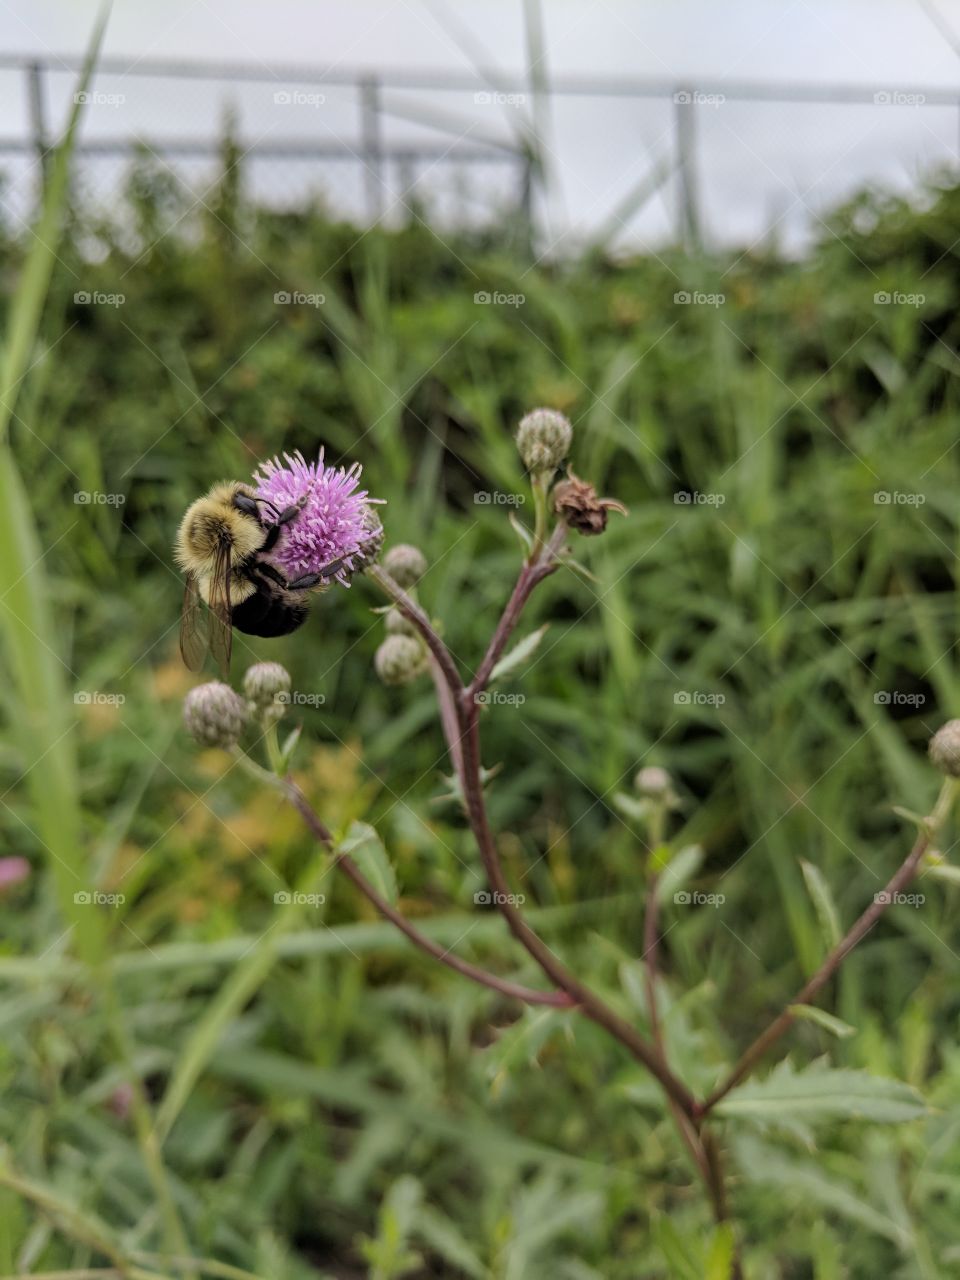 bumblebee on a flower, living his best life